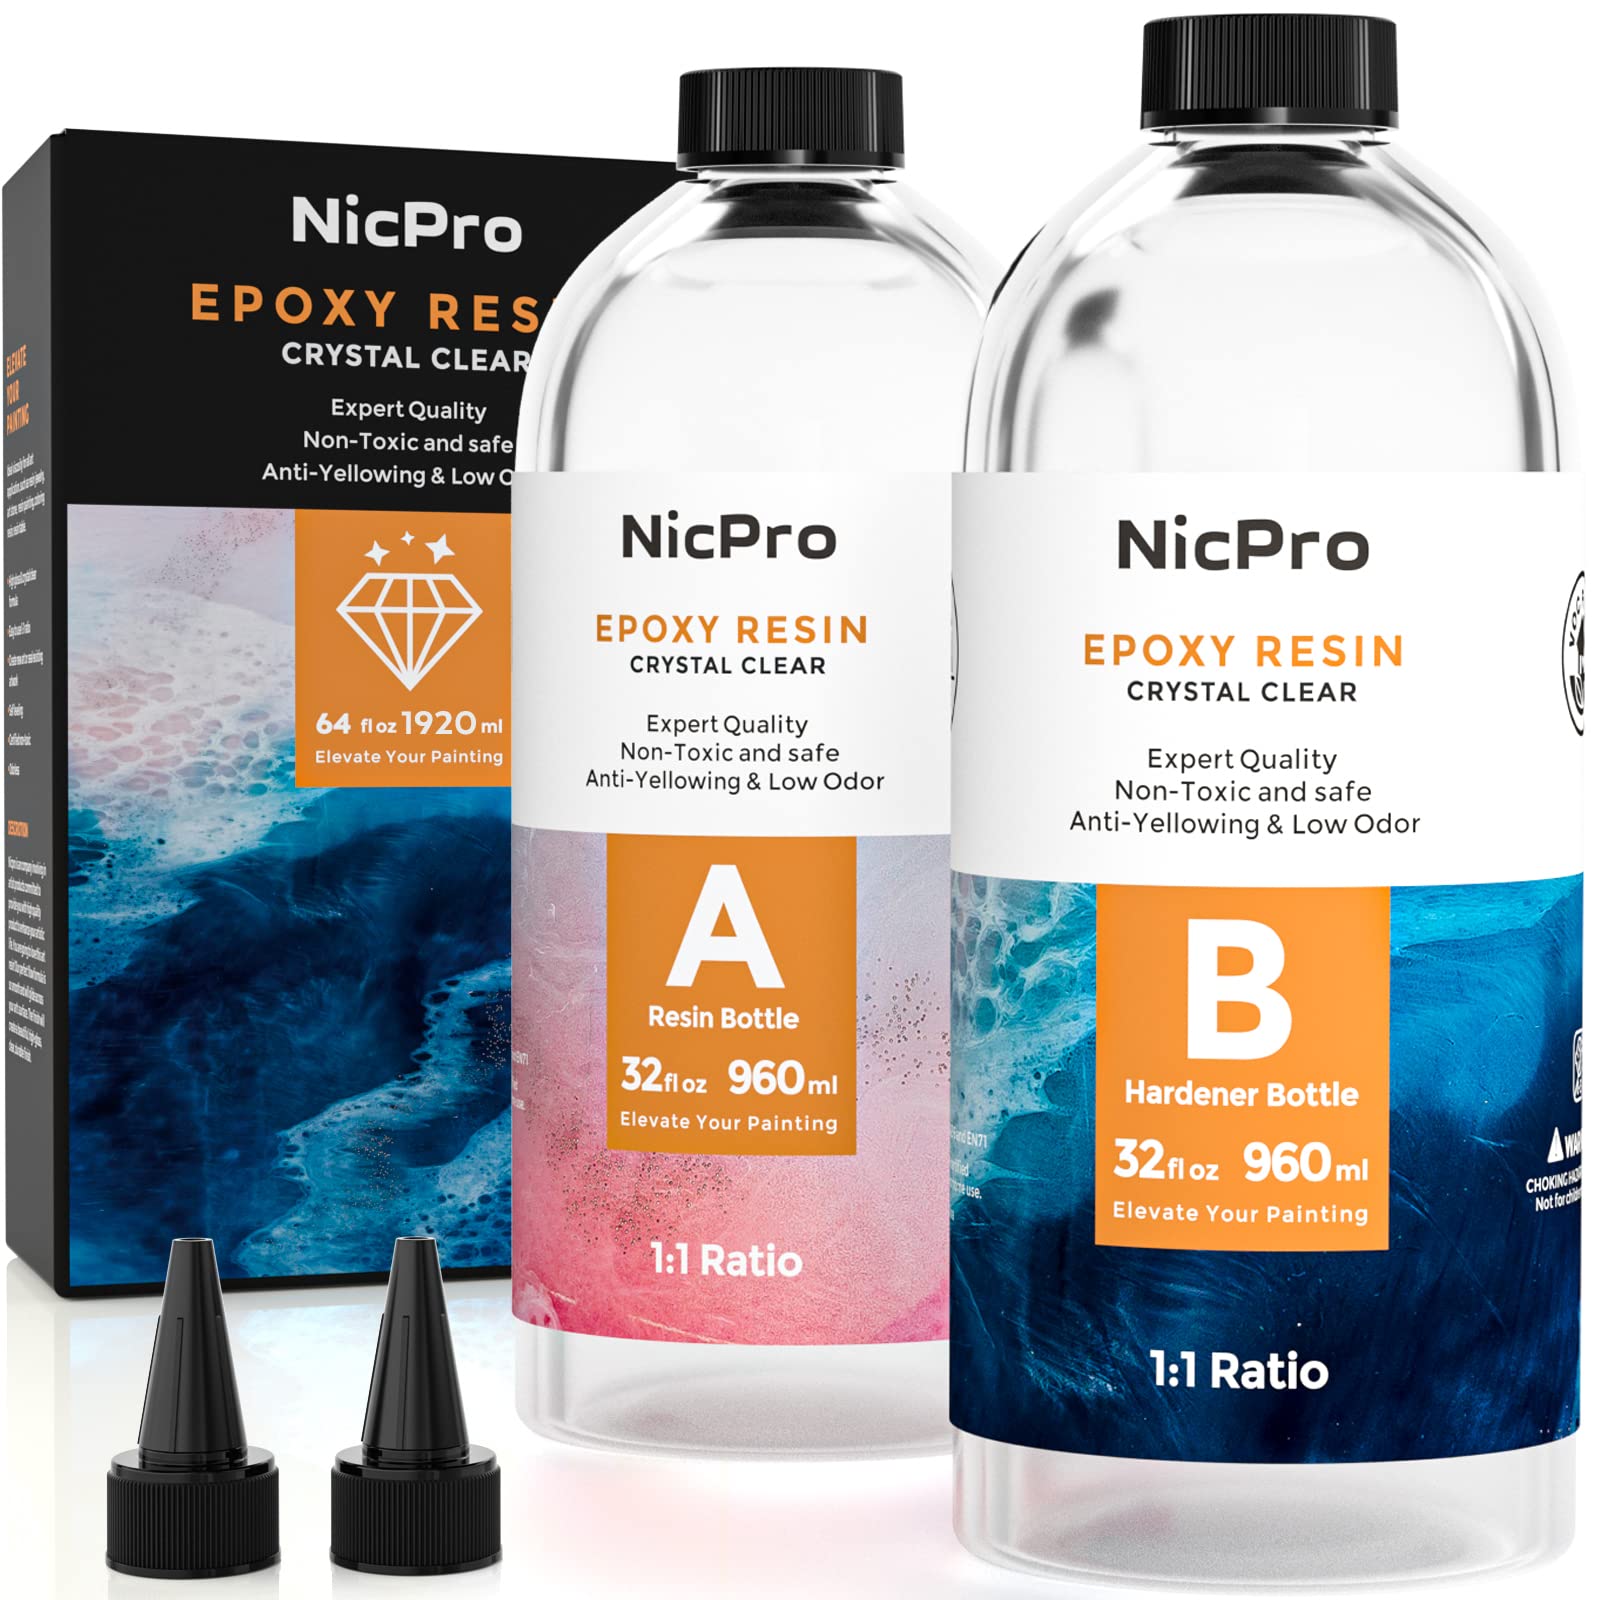 71- #NICPRO EPOXY RESIN REVIEW, POURS AND UNMOLDING. DIY CRAFTS